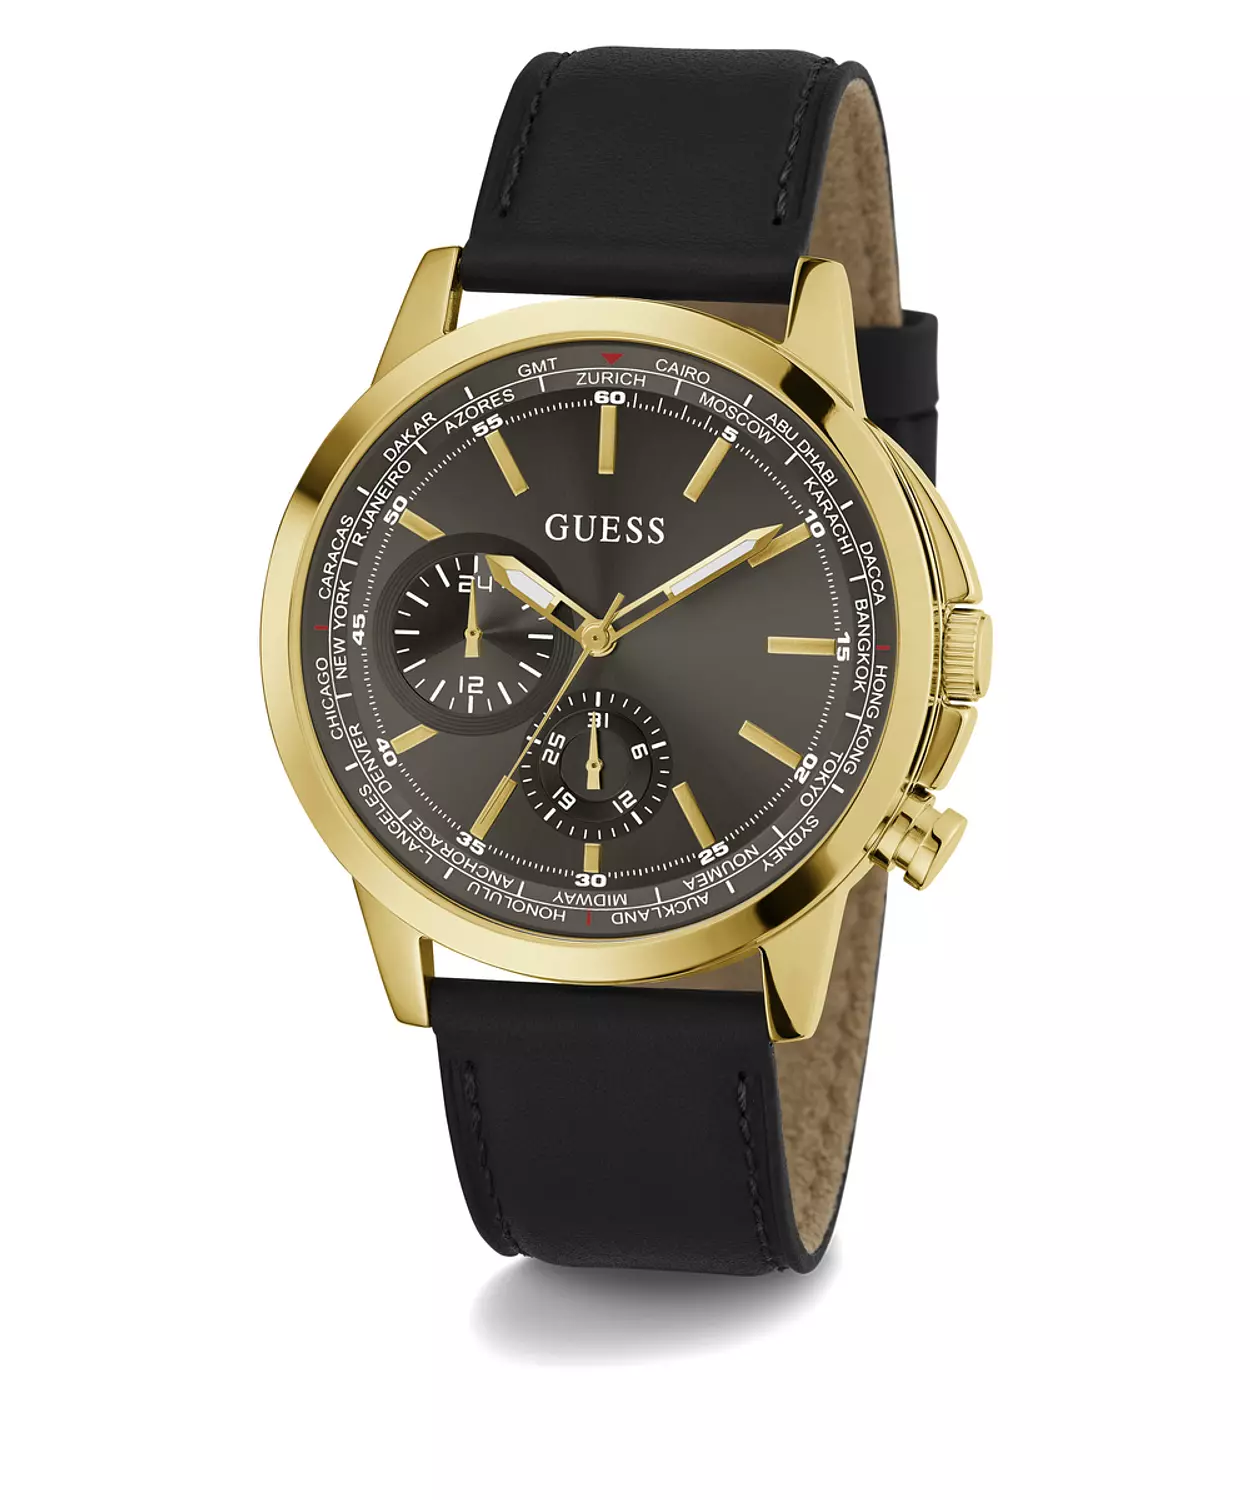 GUESS GW0540G1 ANALOG WATCH For Men Round Shape BlackGenuine Leather Smooth Strap 2